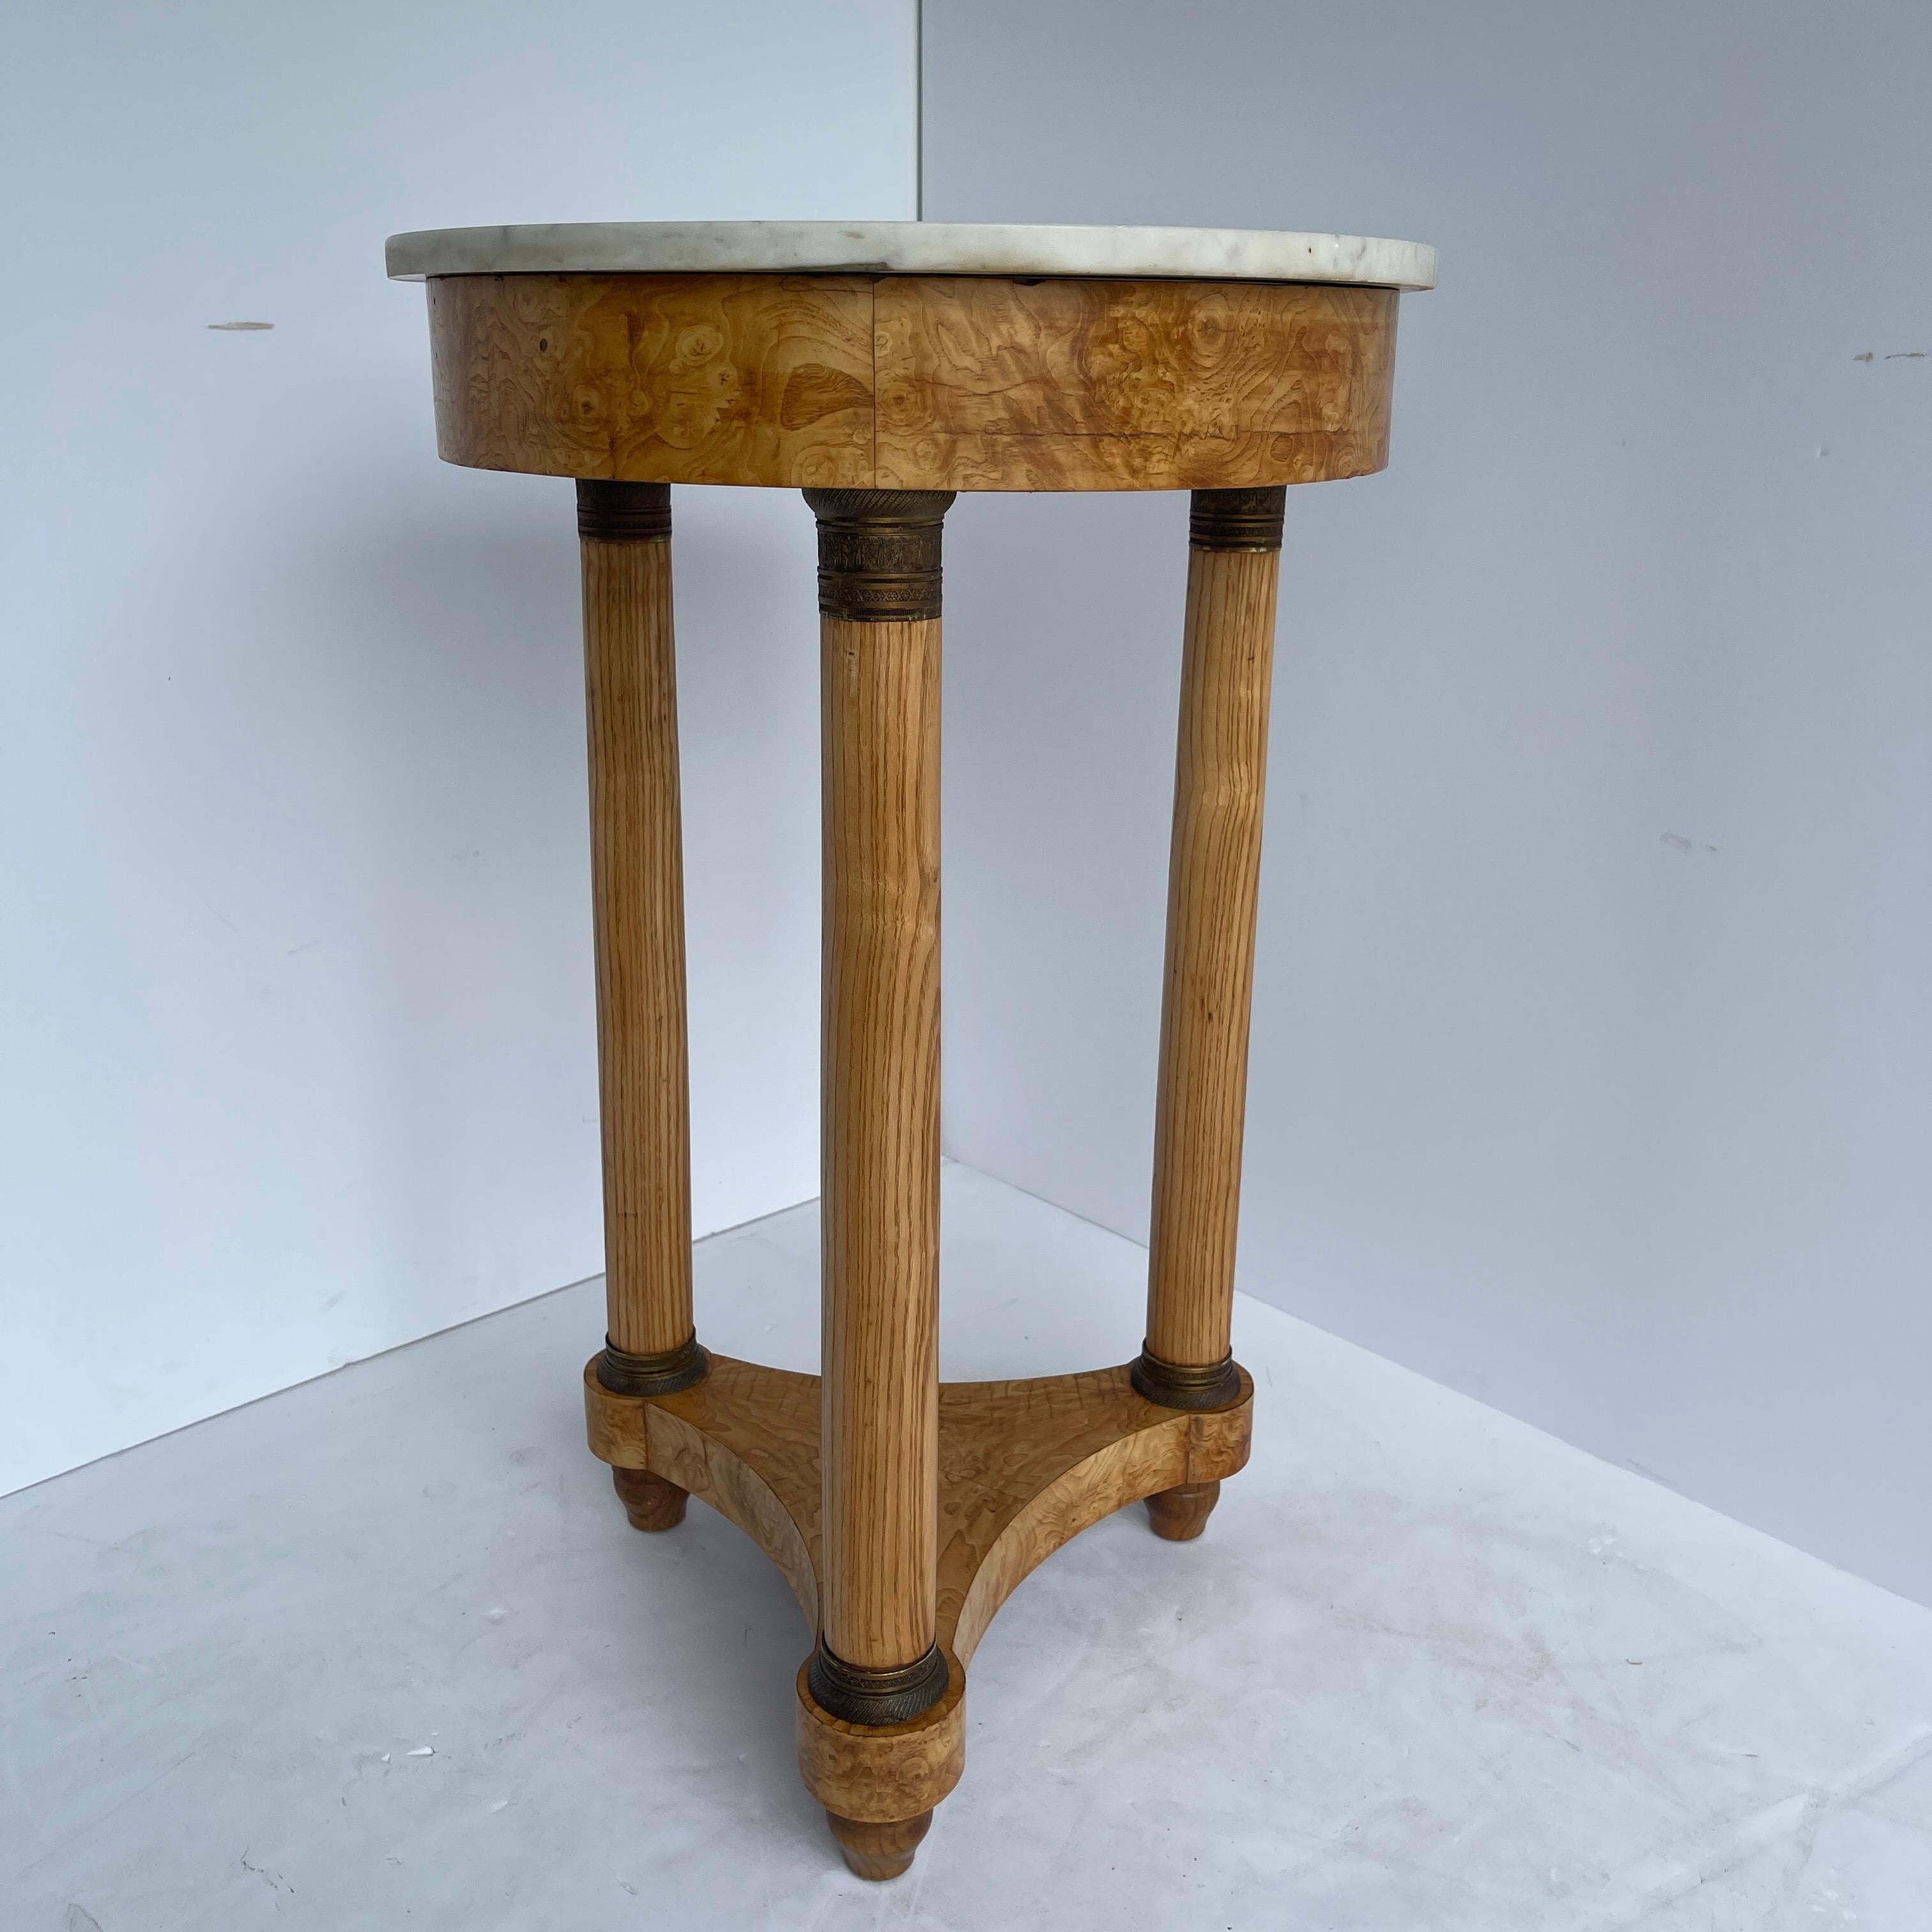 French neoclassical white marble top empire style round table with bronze hardware. Beautiful elegant maple side table with three long slender legs and lovely curved bottom trestle. The maple wood grain glows in the light. This table is perfectly